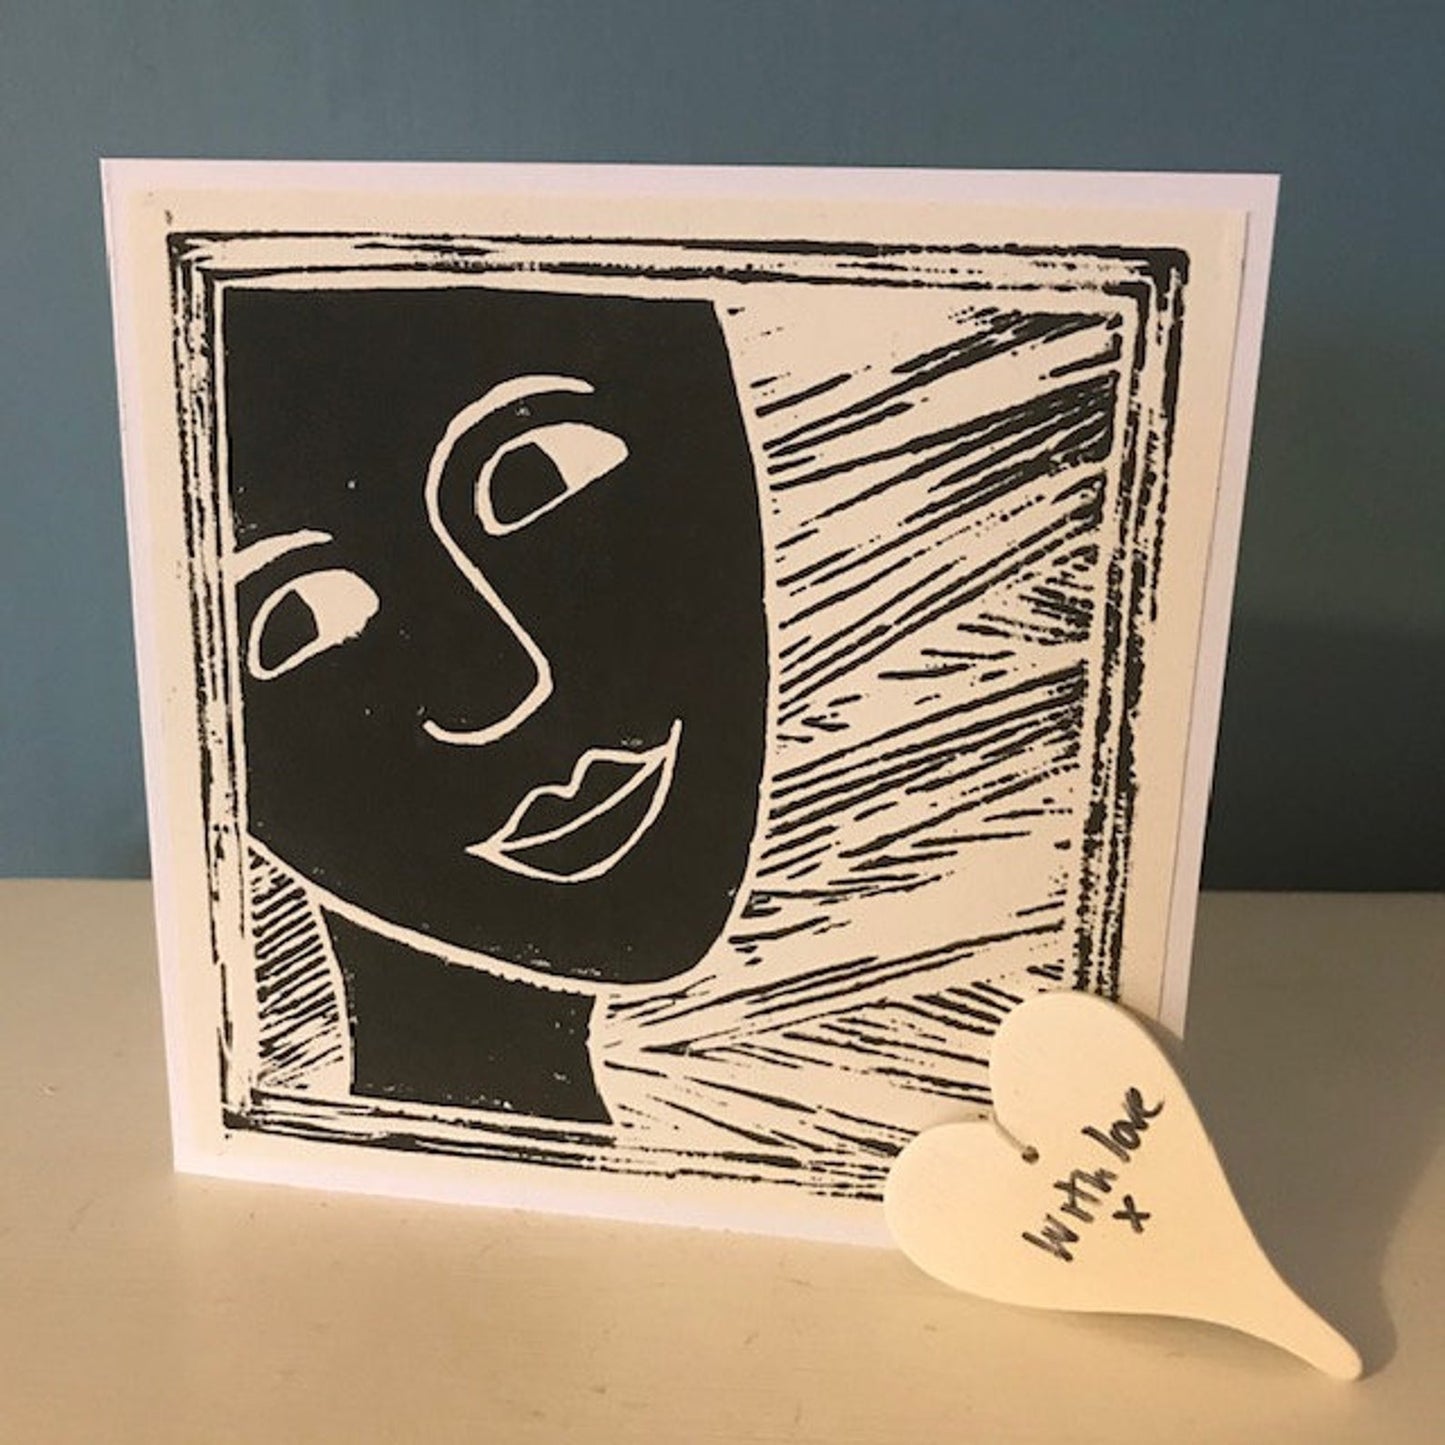 Face II Hand printed lino cut greeting card. Blank inside for your very own message.